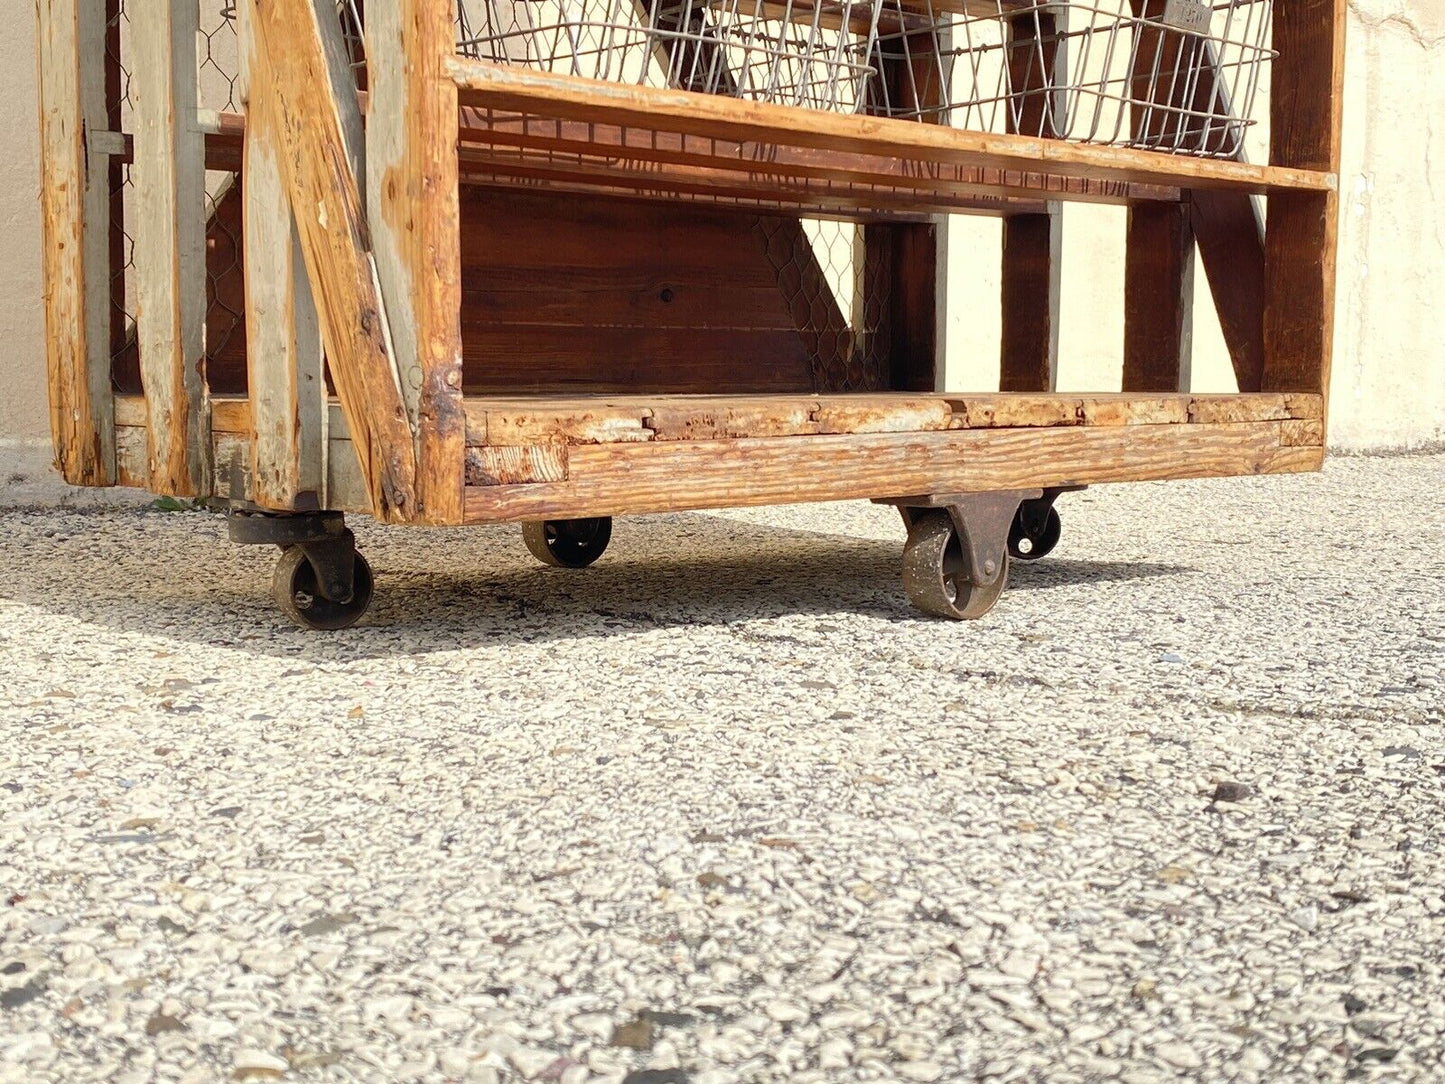 Antique American Industrial Wooden Rolling Shelf Storage Cart Distressed Gray